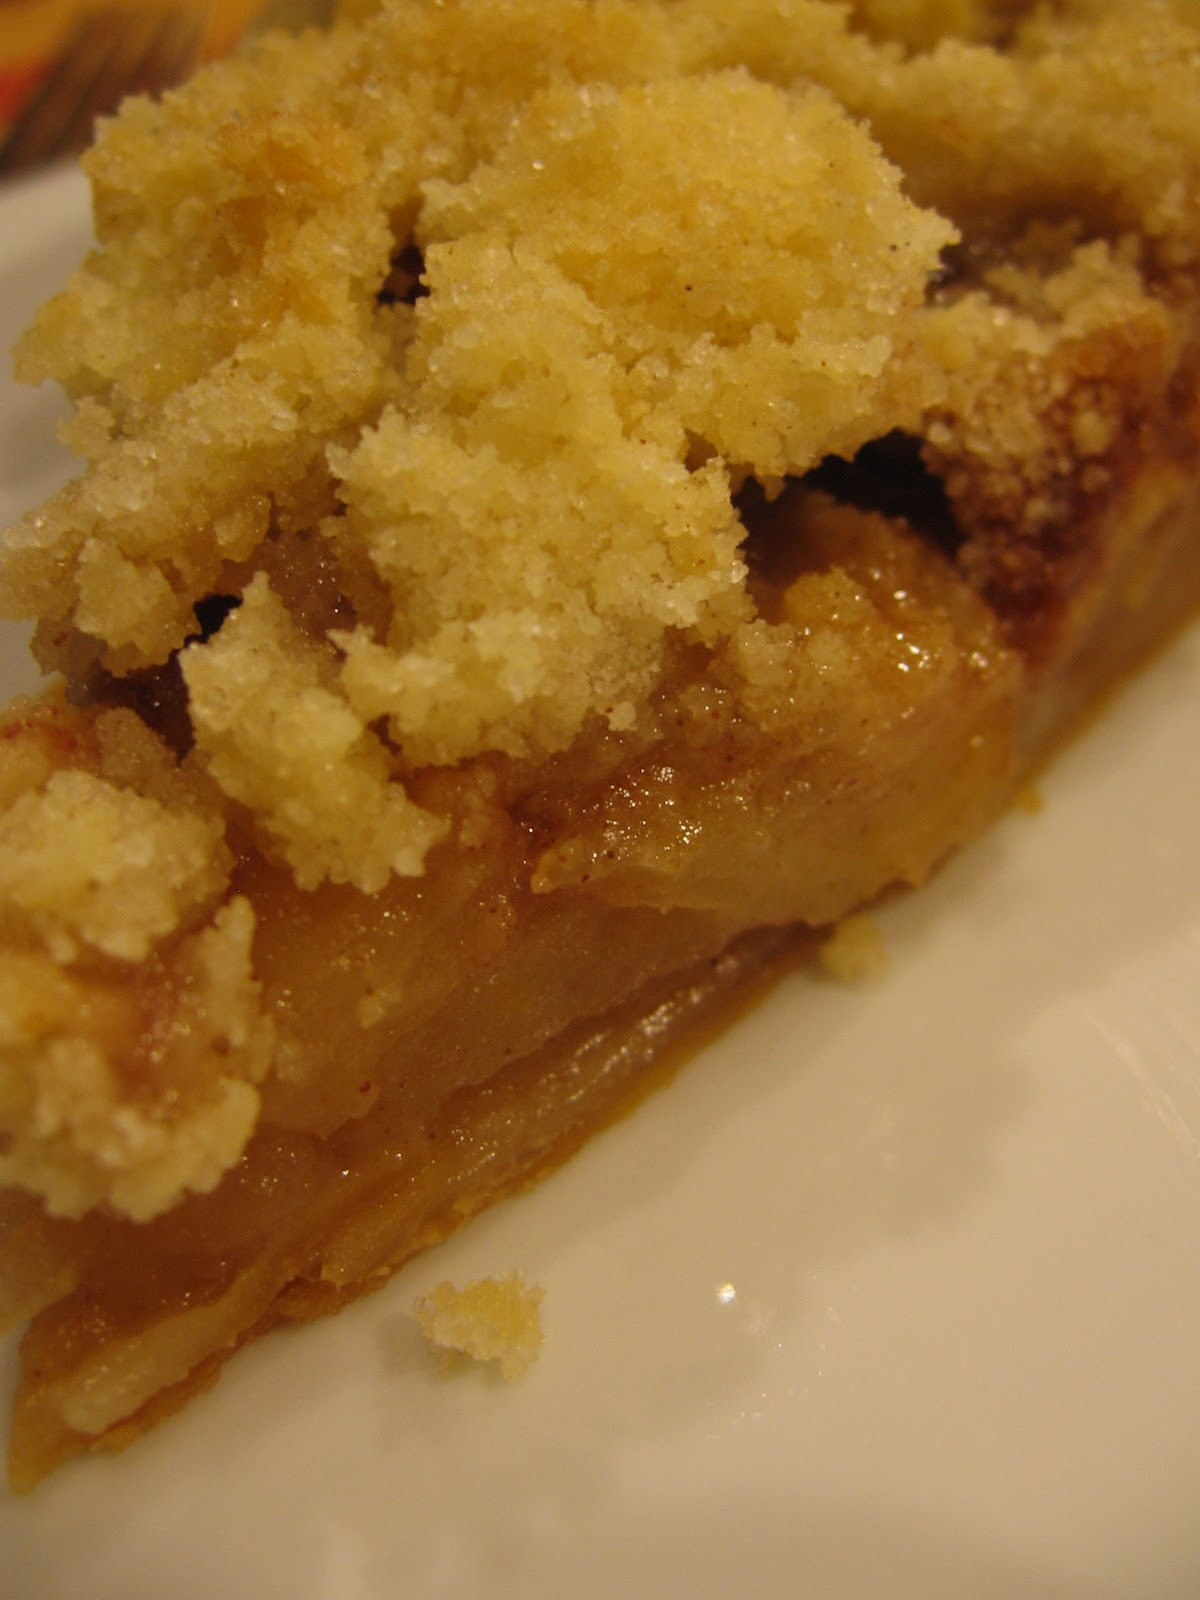 Apple Pie Recipe Food Network
 Apple Pie Recipe With Crumb Topping From Food Network